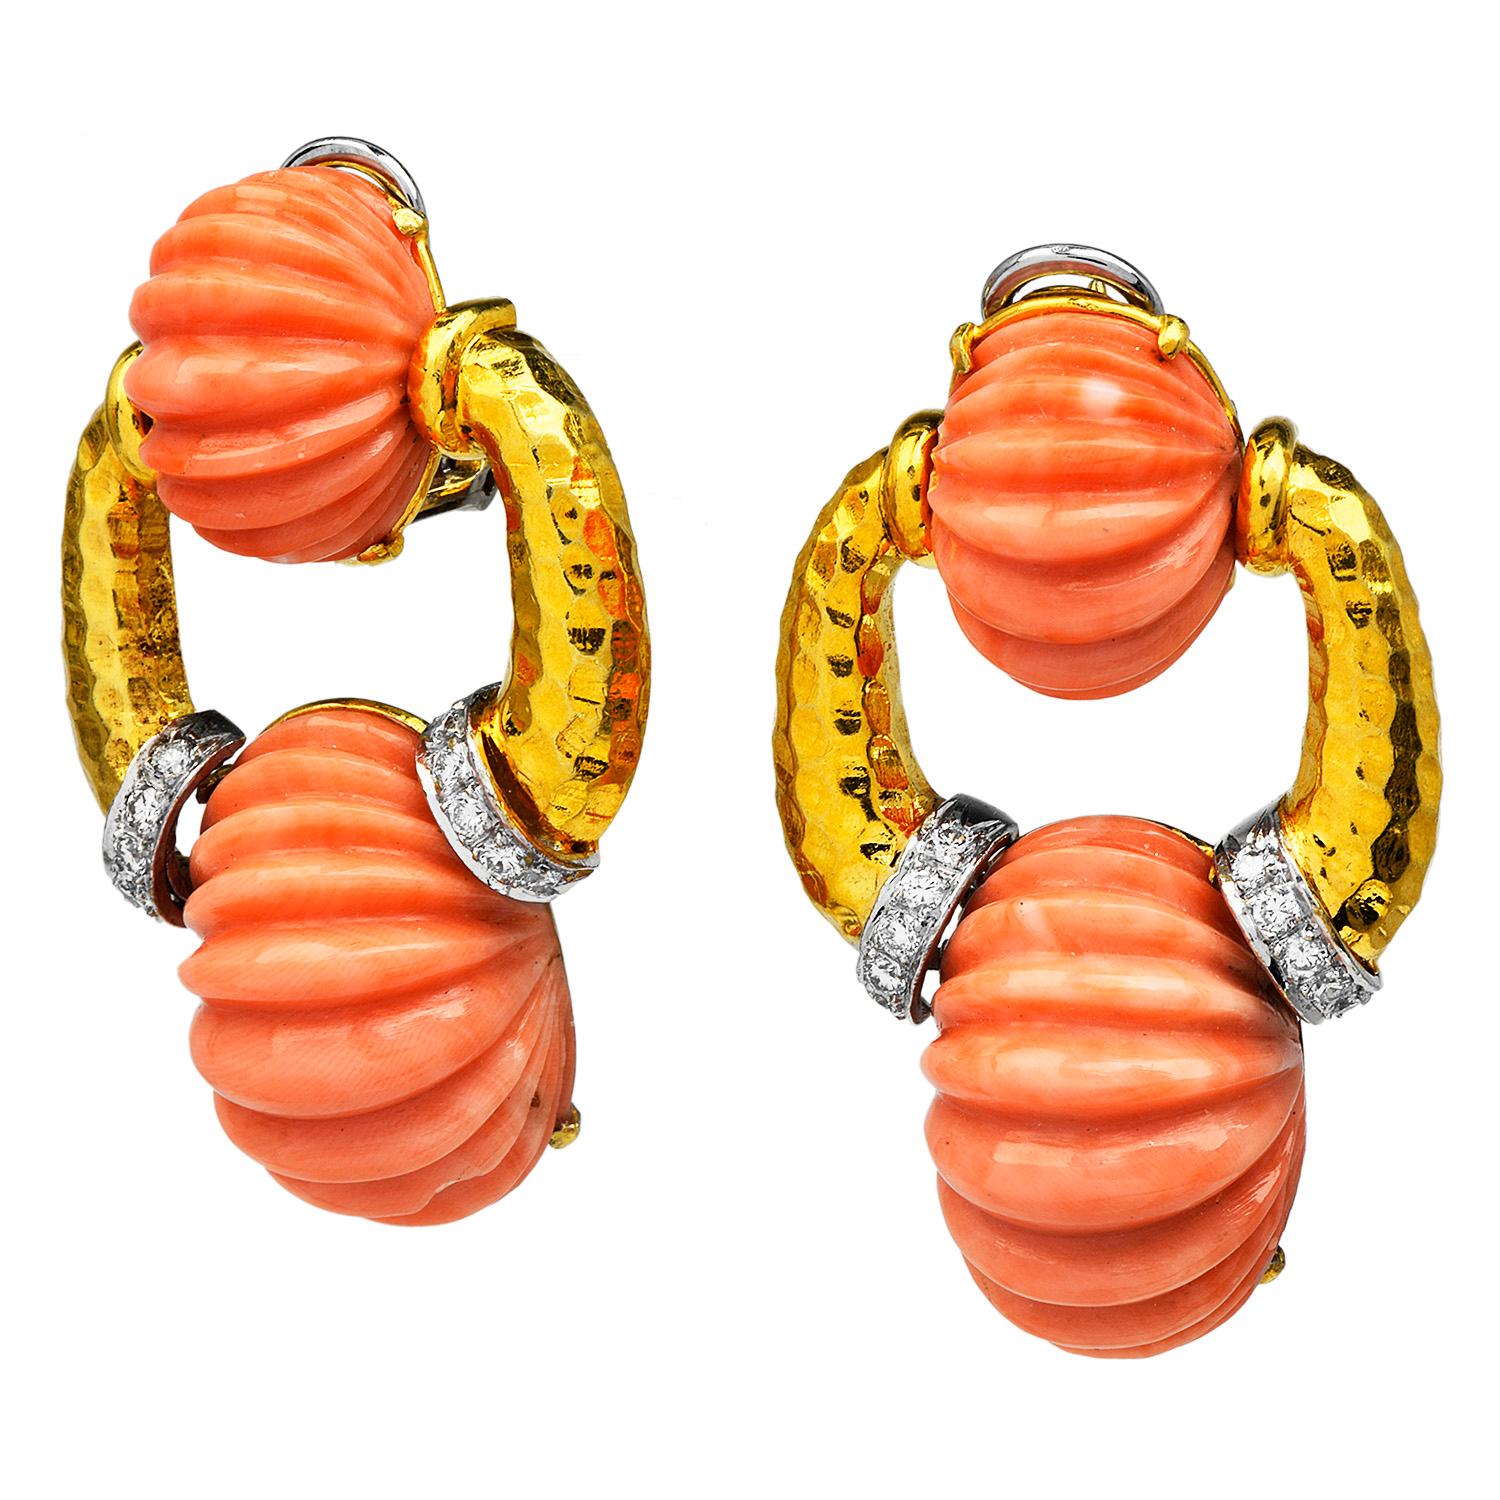 These exceptional hand-made vintage retro earrings, from the brand TRIO, are inspired in the Door-knocker style dangle hoop design.

Crafted in solid 18K yellow gold, enhnaced by 4 genuine carved natural salmon-colored coral, 24mm x 15 mm & 16 mm x